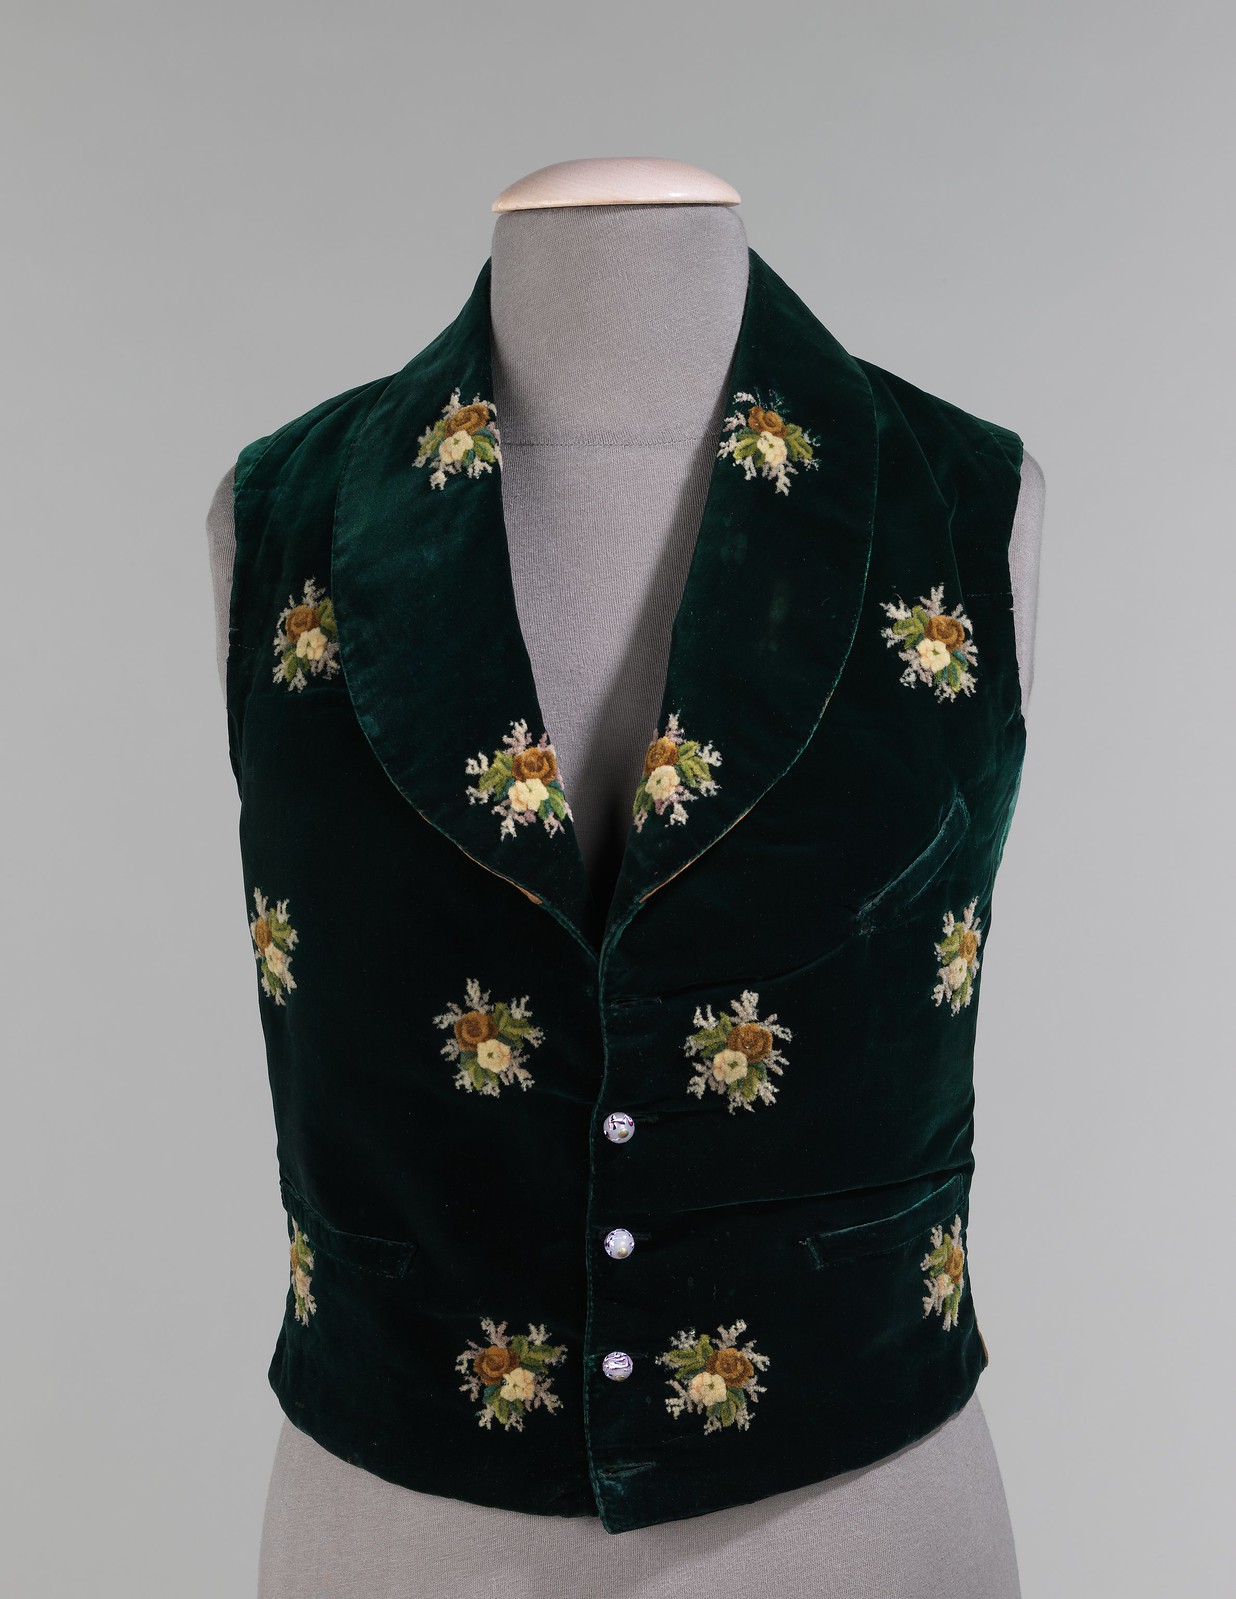 1838. American. Silk, cotton, wool, leather, glass. metmuseum